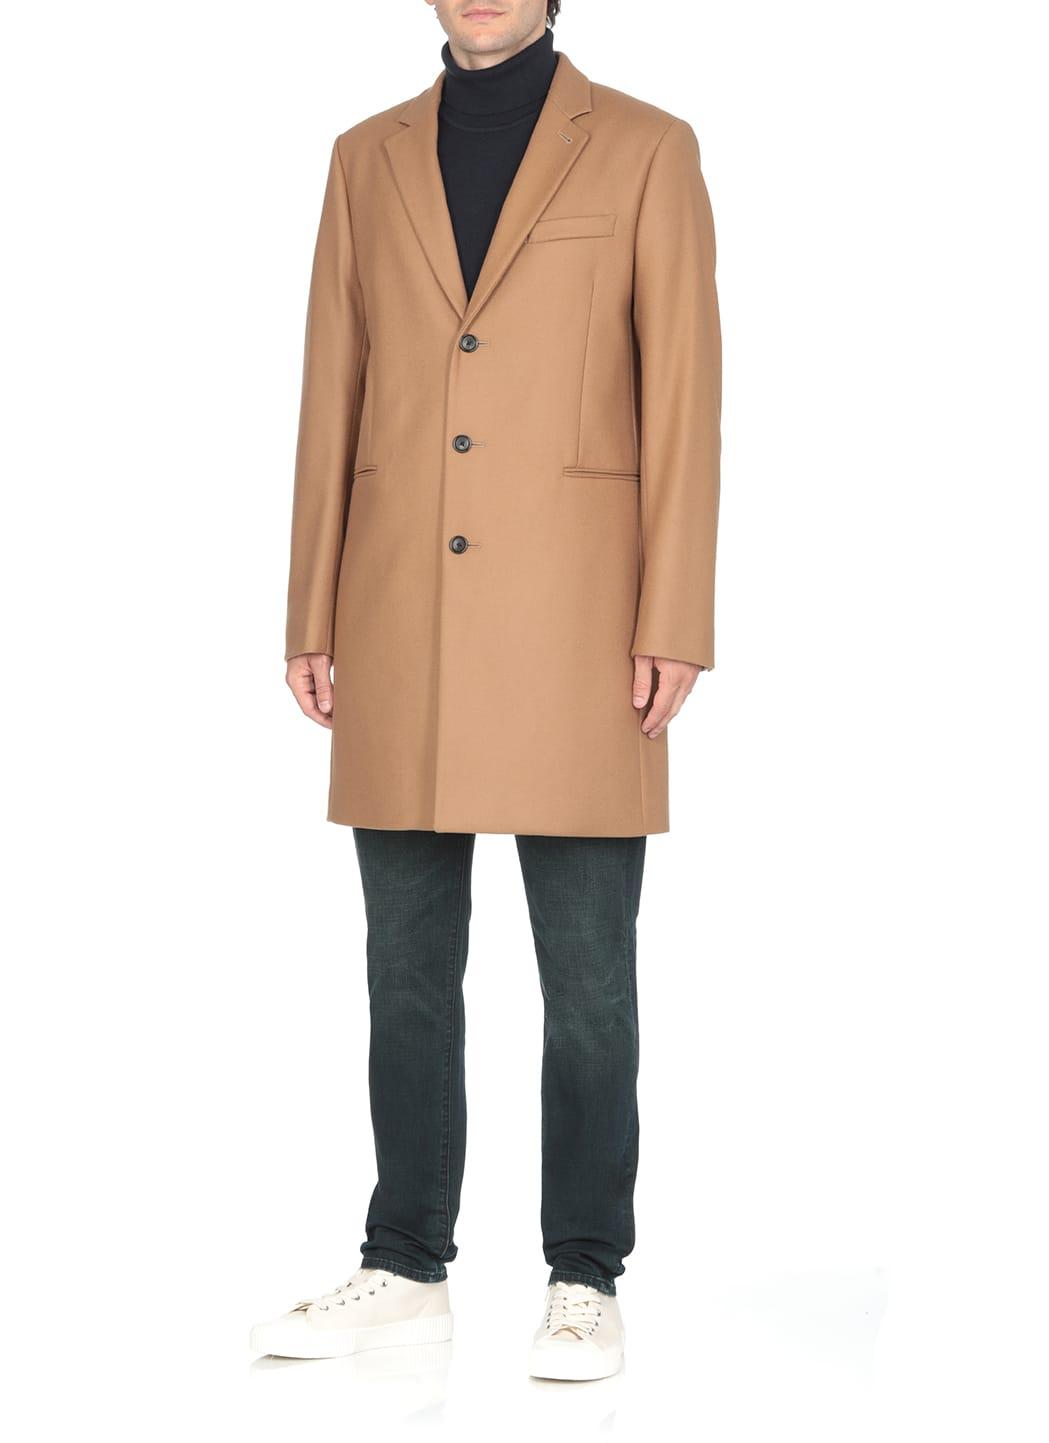 PS by Paul Smith Wool And Cashmere Coat in Natural for Men | Lyst